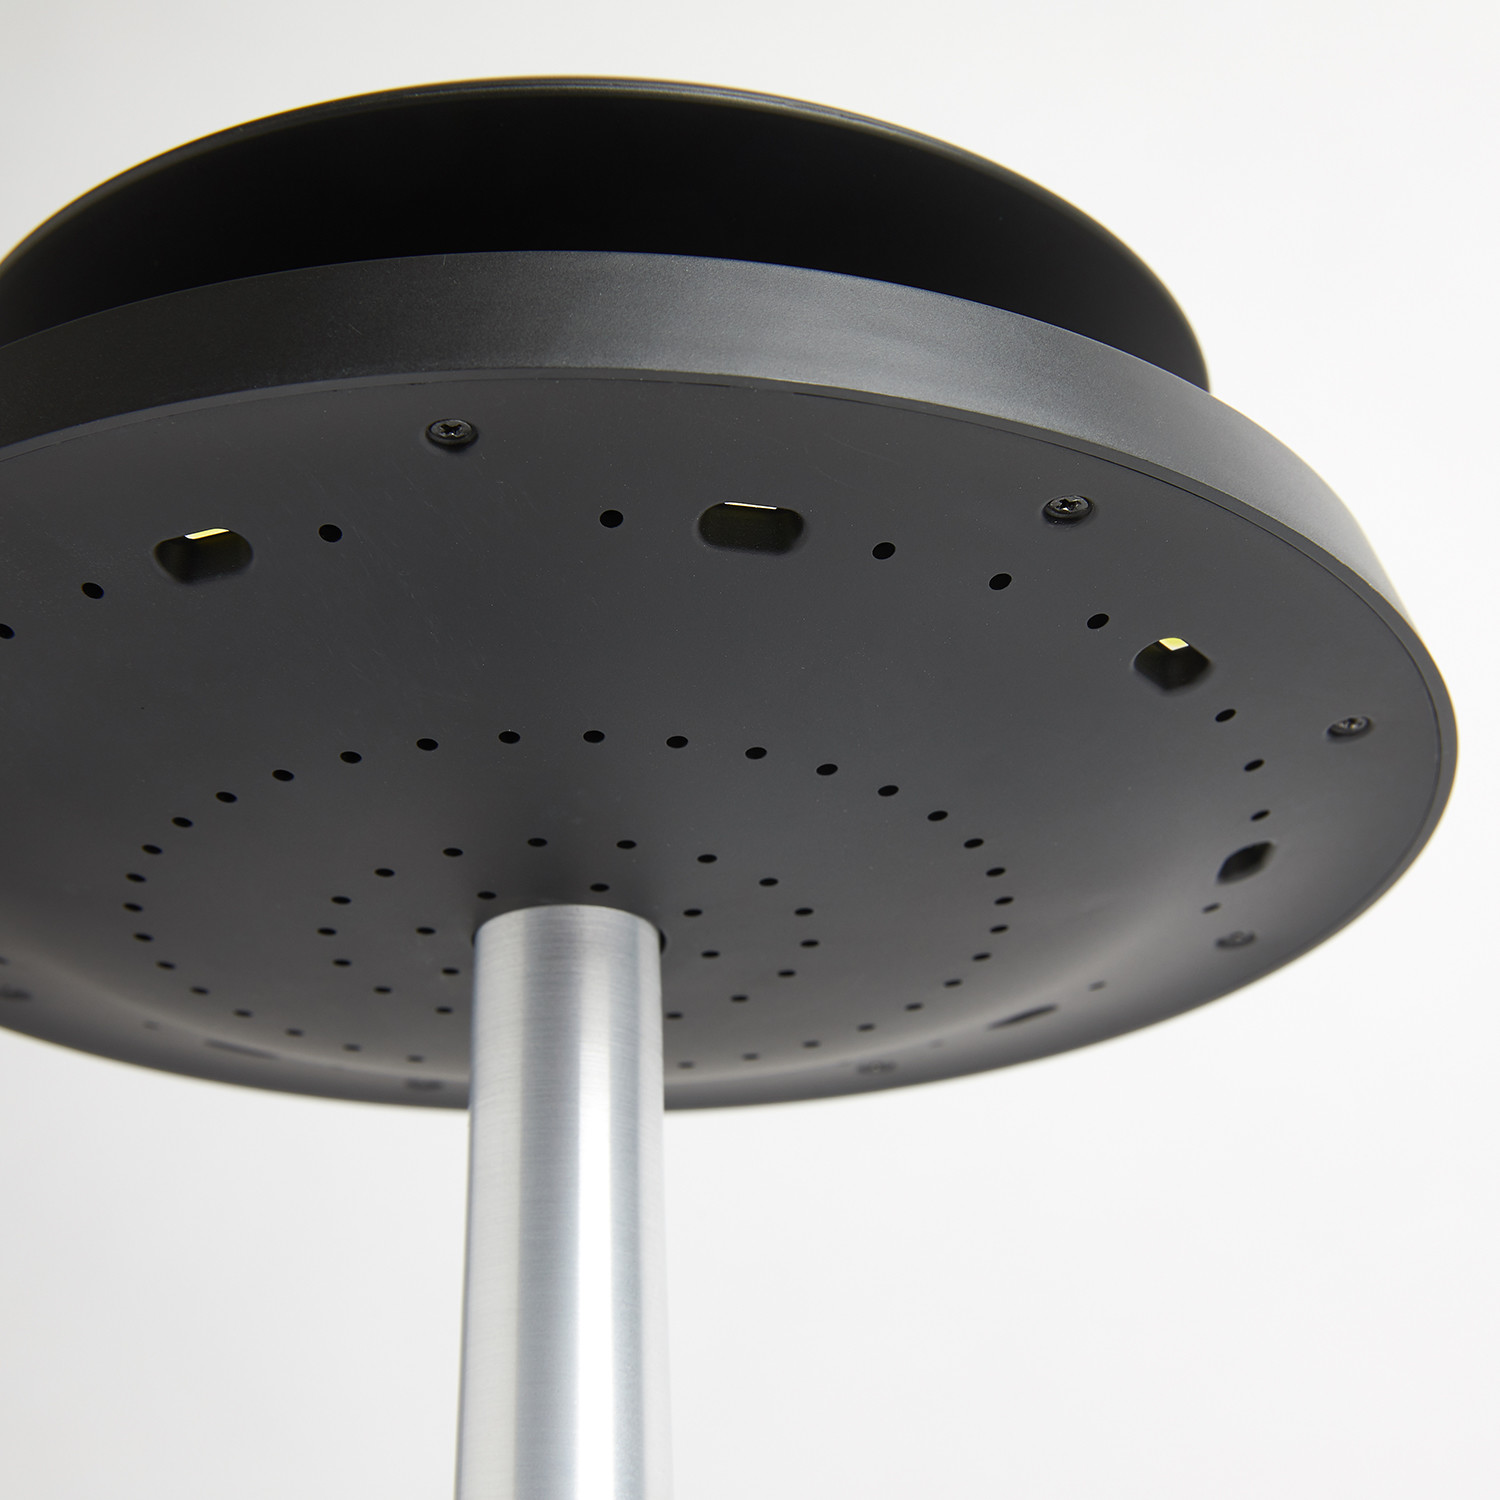 Ufo Lamp - UFO 3D LED Lamp - In today's video, we made an amazing ufo